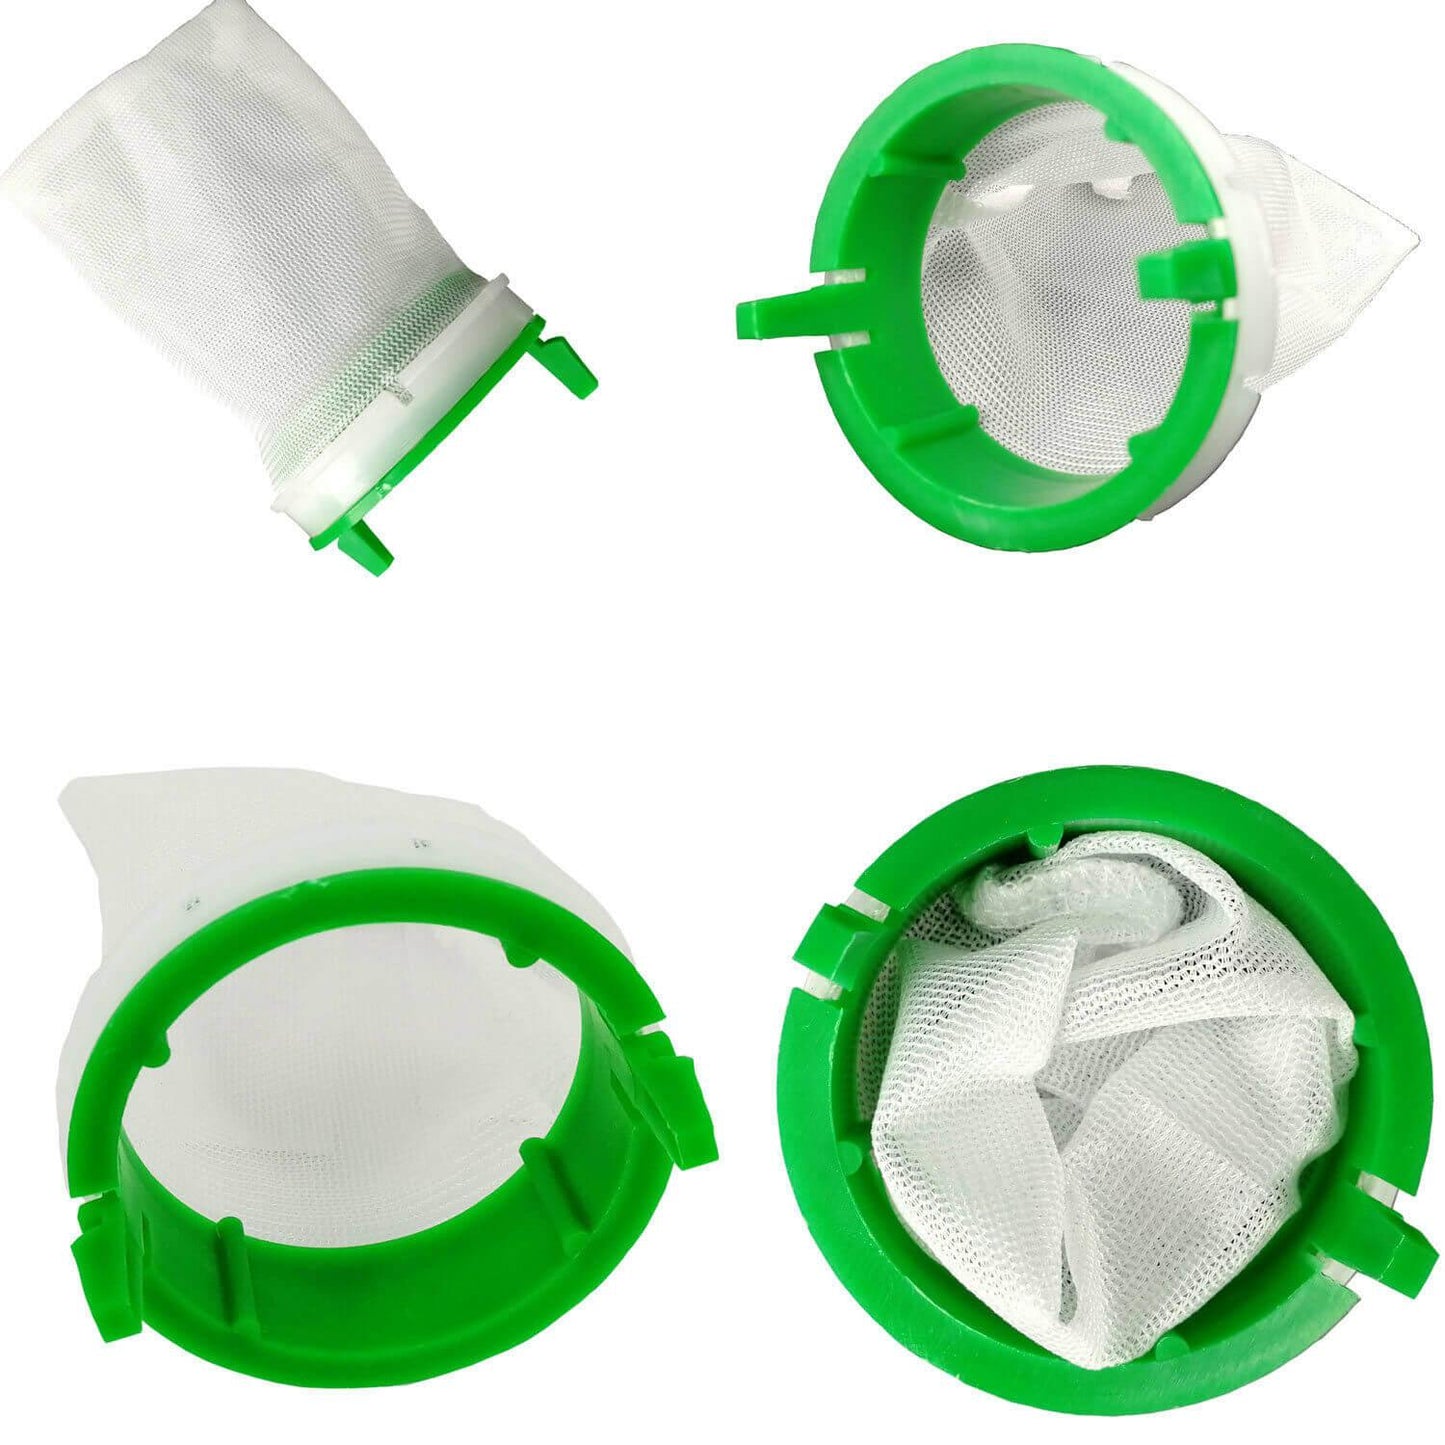 4X Washing Machine Lint Filter Bag For Simpson 36P500M 36S550M 36S550N Washer Sparesbarn